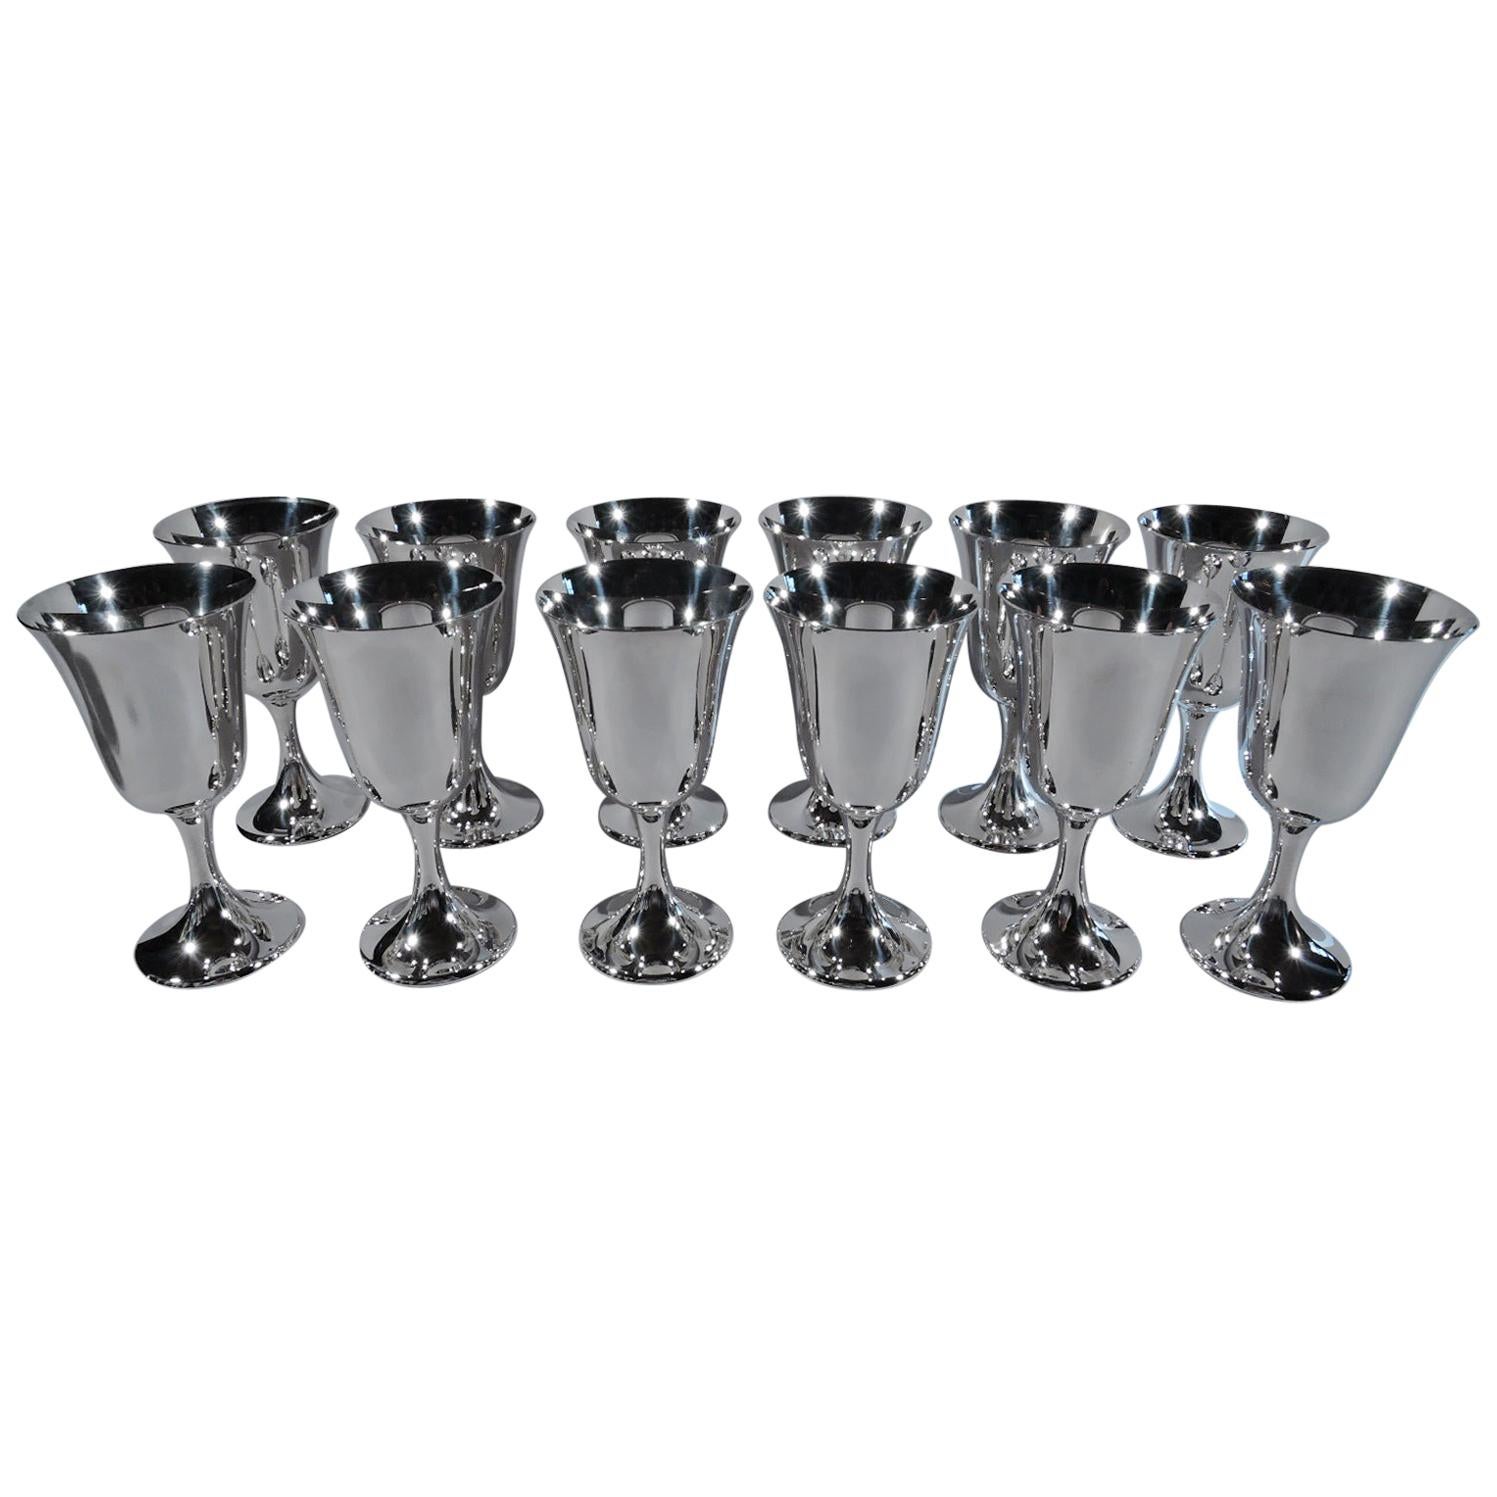 Set of 12 Gorham Sterling Silver Goblets in Desirable Puritan 272 Pattern